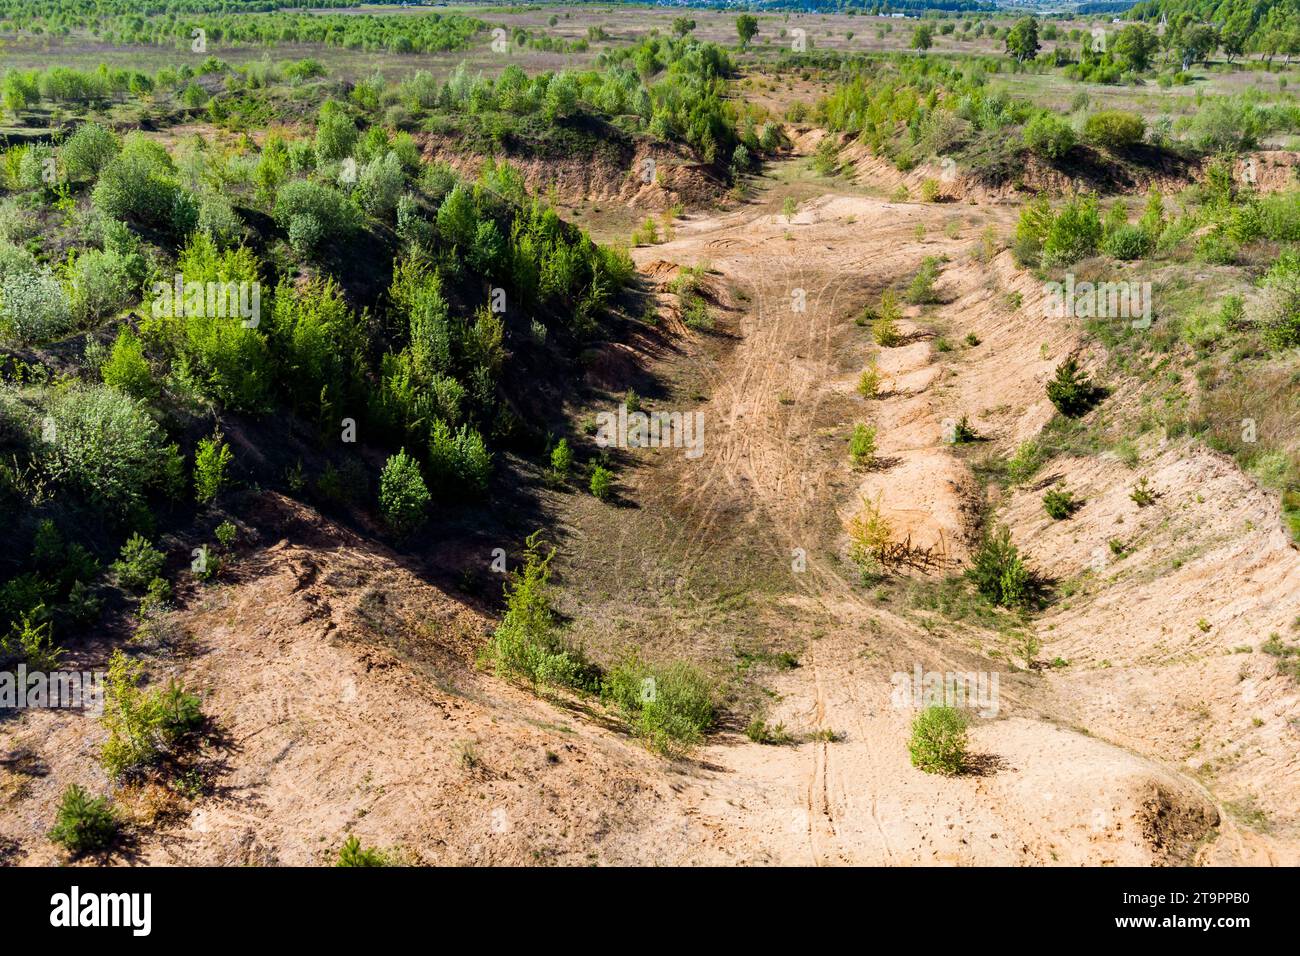 Overgrown exploratory sand pit in a field, soil removed to layers of sand Stock Photo